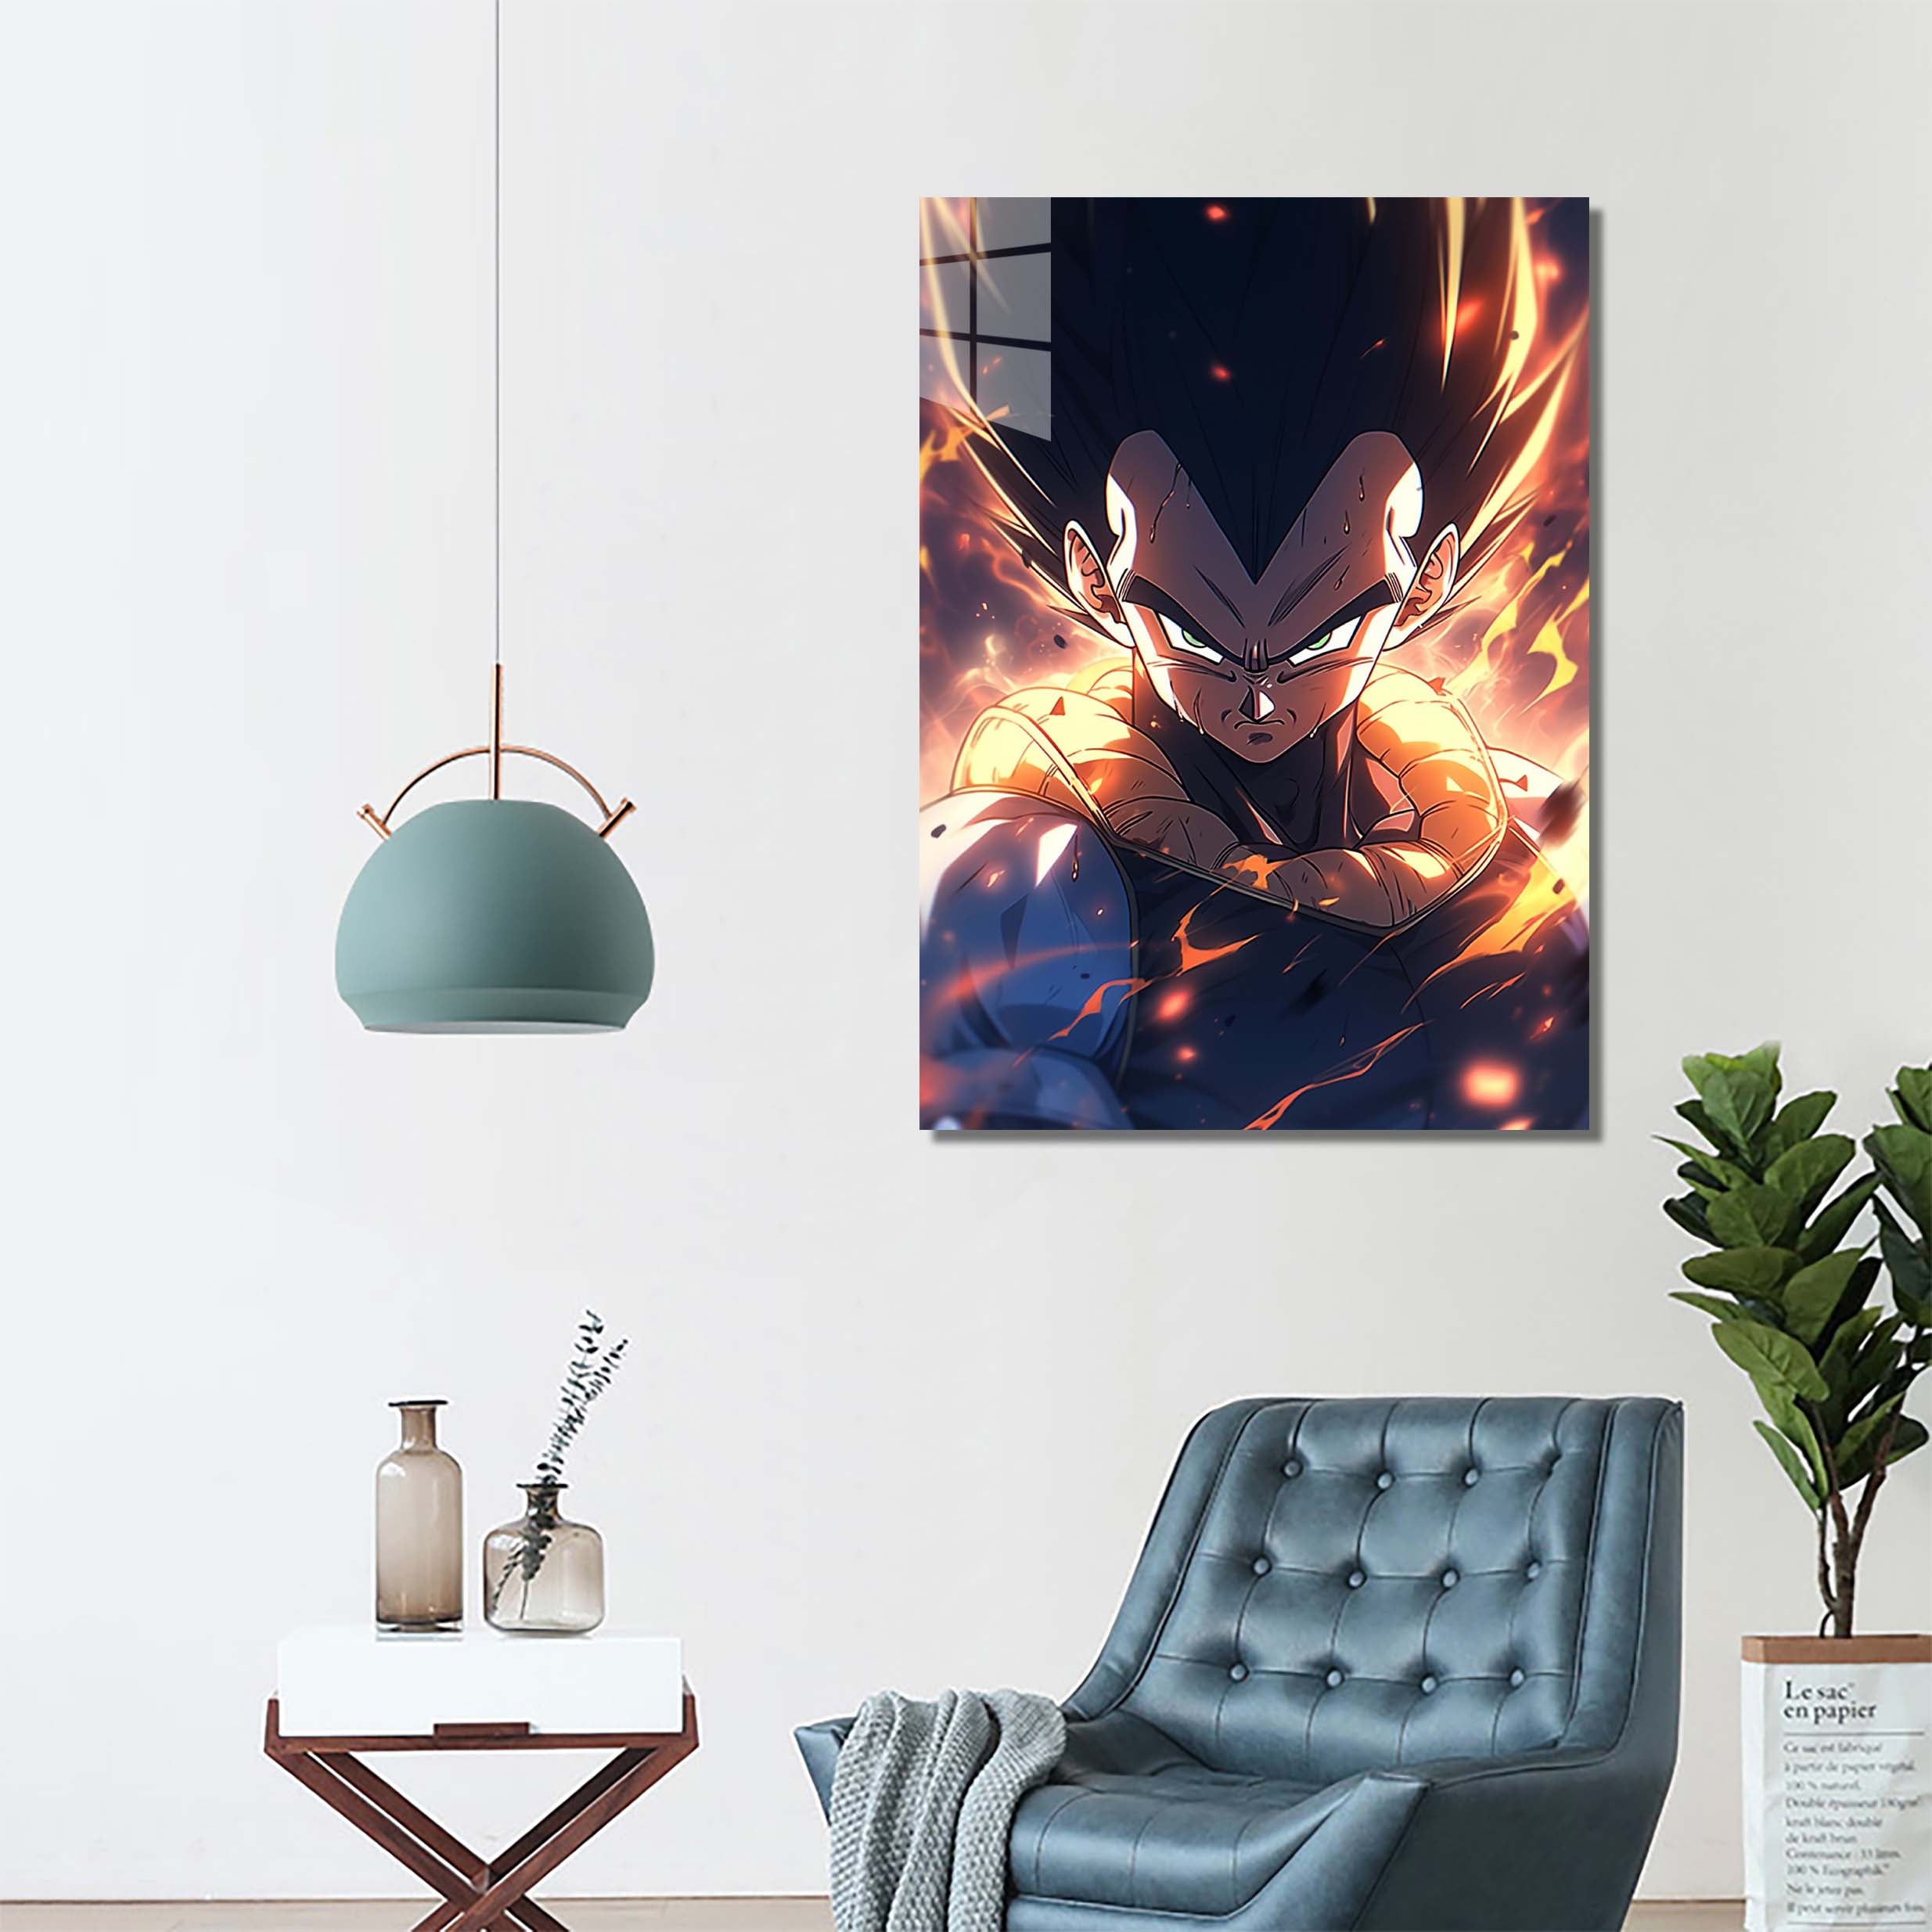 Beyond the Elite_ Vegeta's Ascension to Greatness-designed by @theanimecrossover